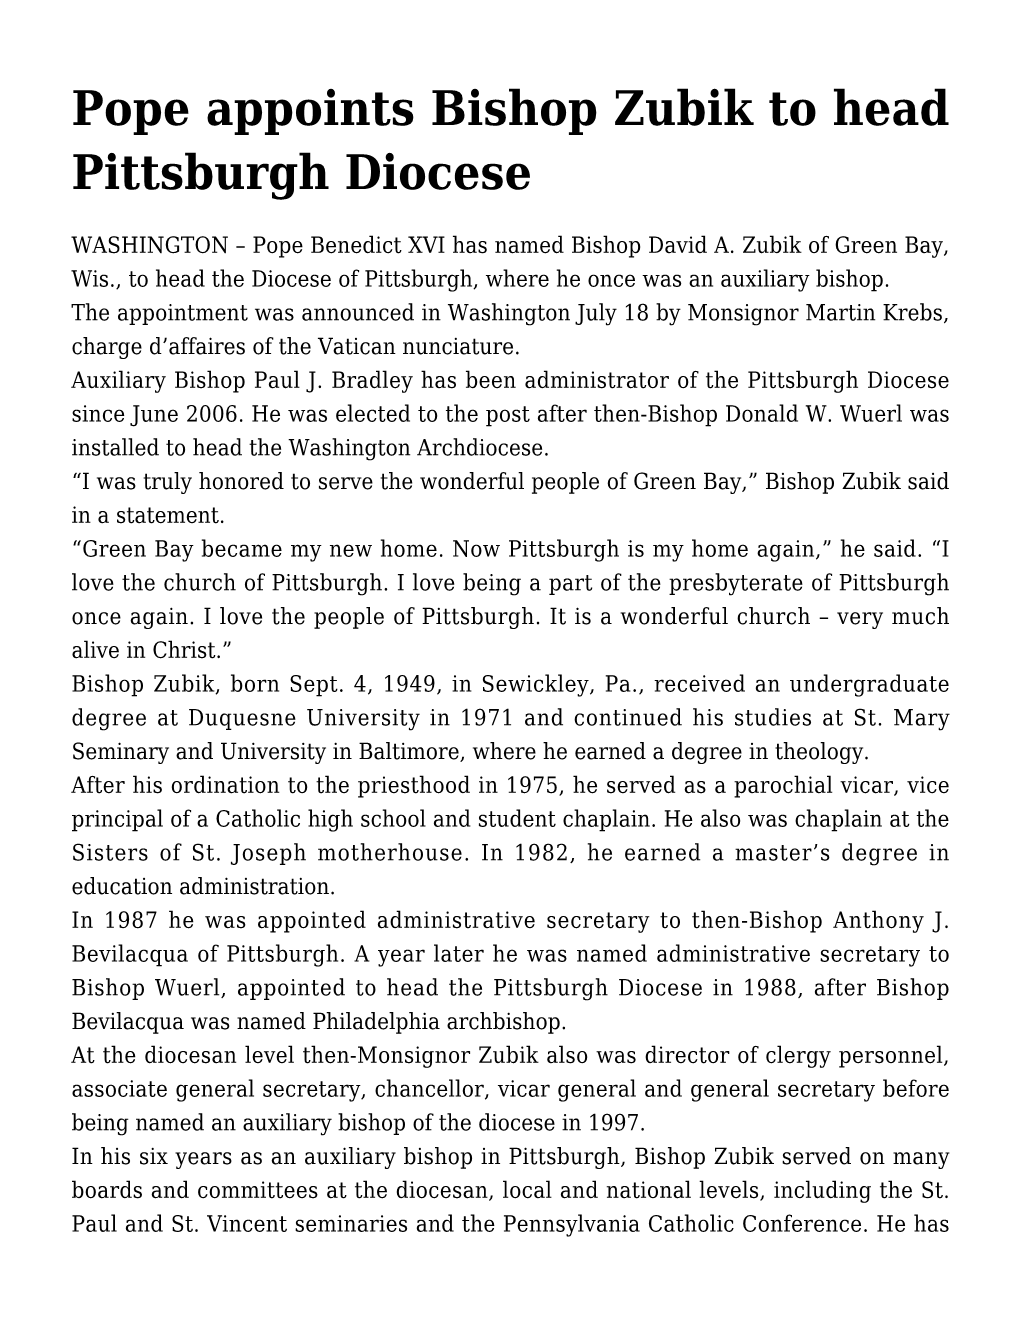 Pope Appoints Bishop Zubik to Head Pittsburgh Diocese